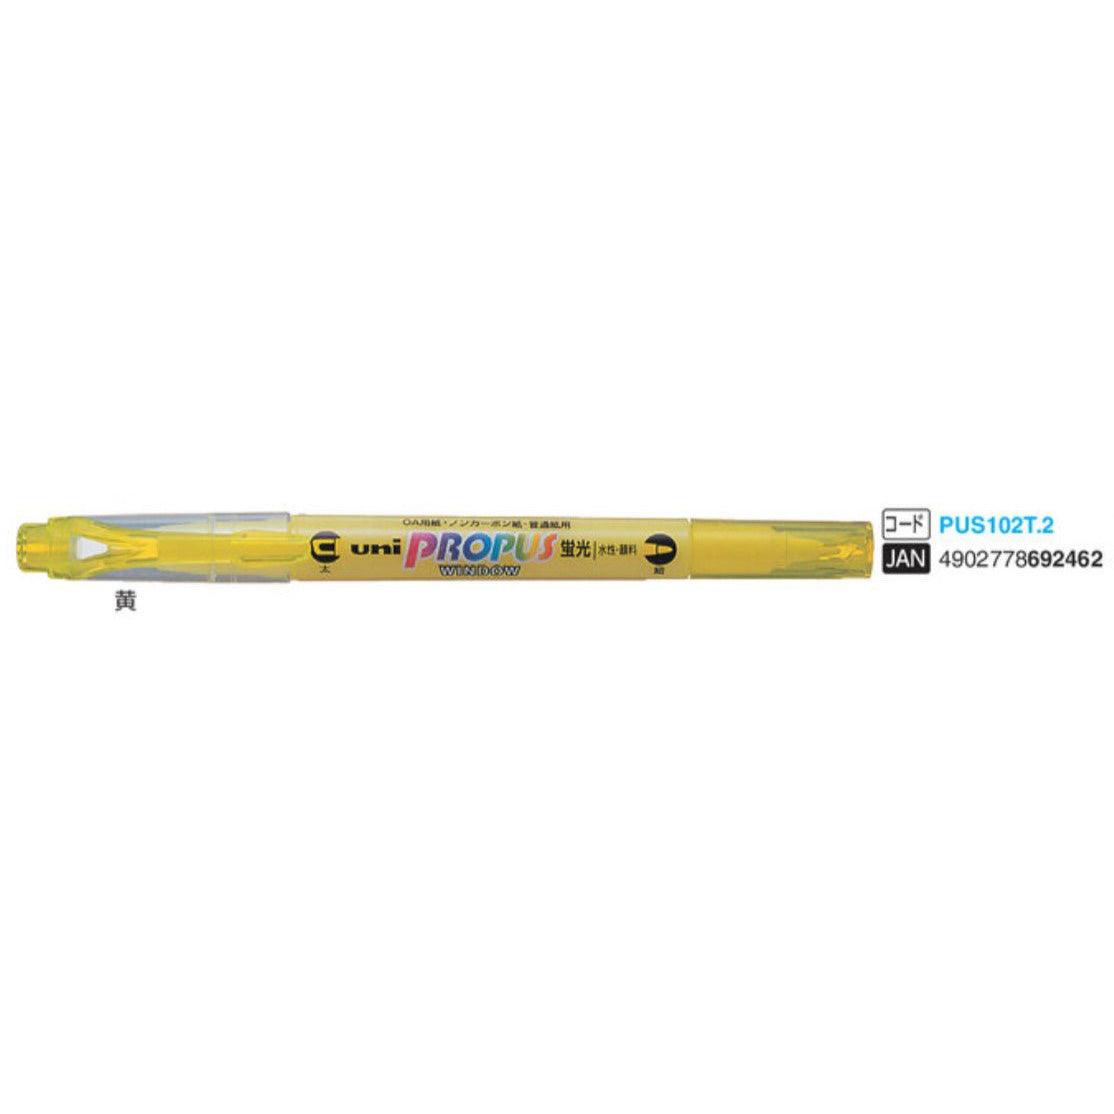 (Pre-Order) UNI Propus window double sided highlighter, PUS-102T - CHL-STORE 